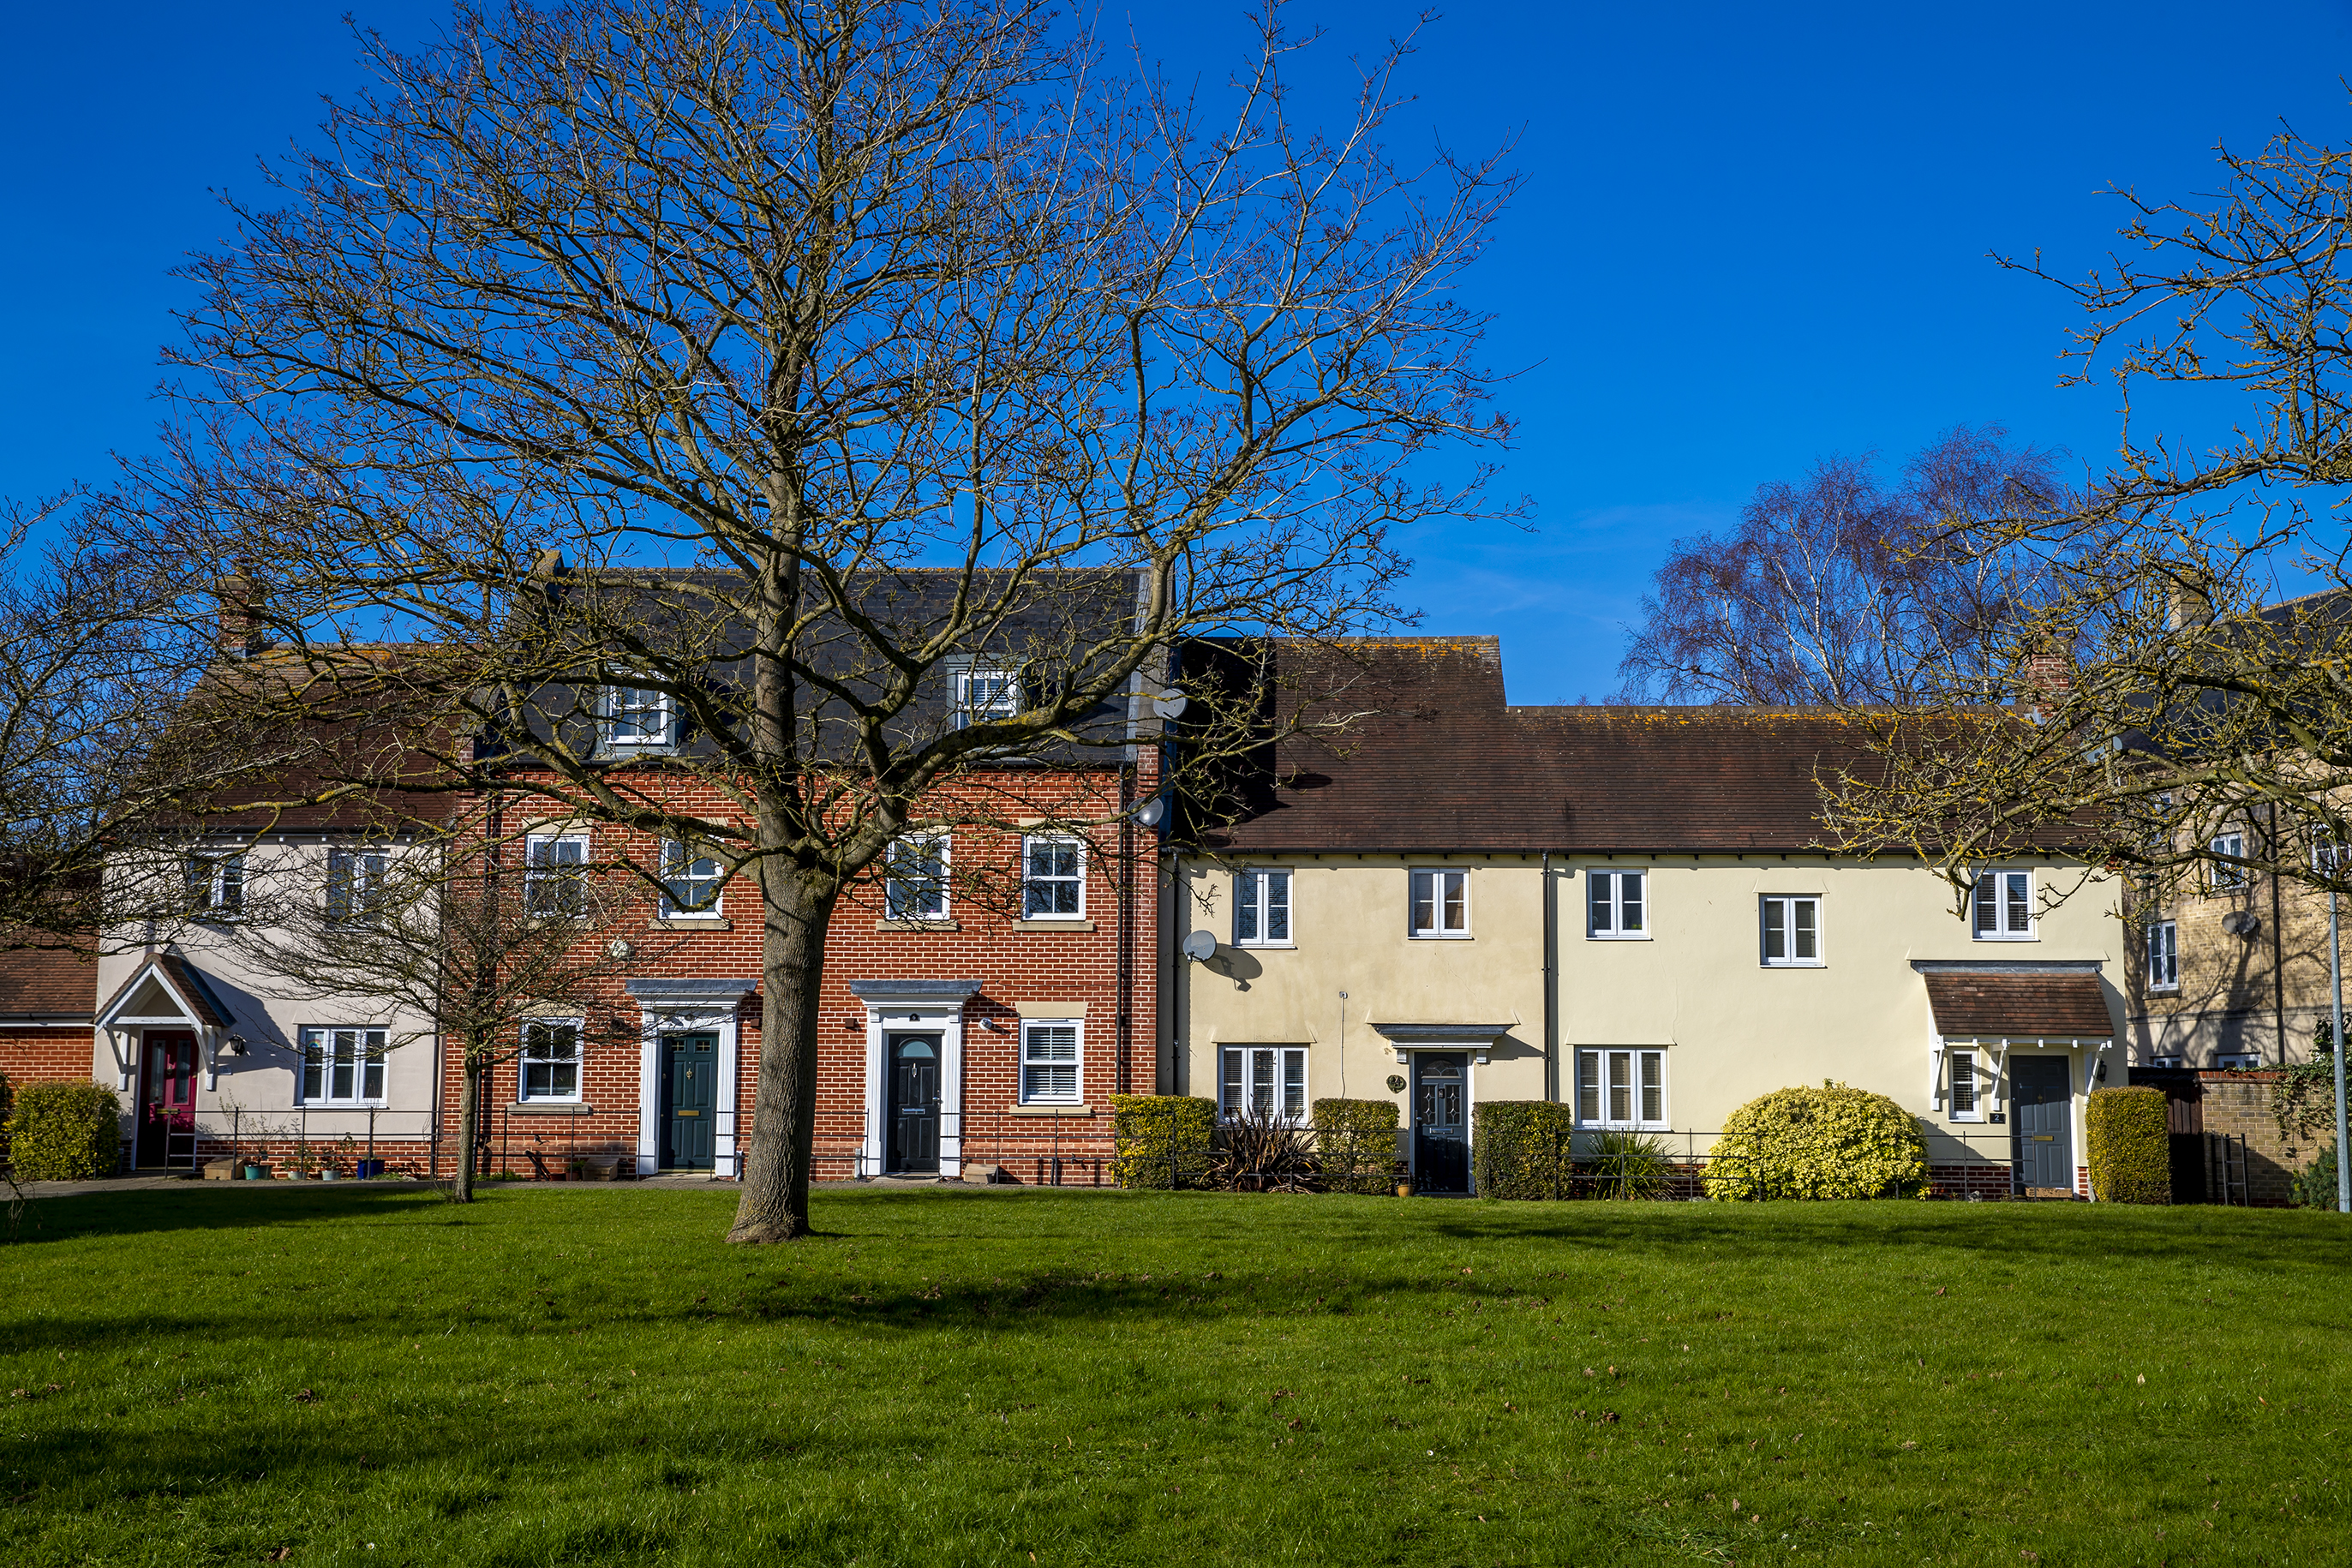 A photo of housing along Black Notley, Braintree - Image